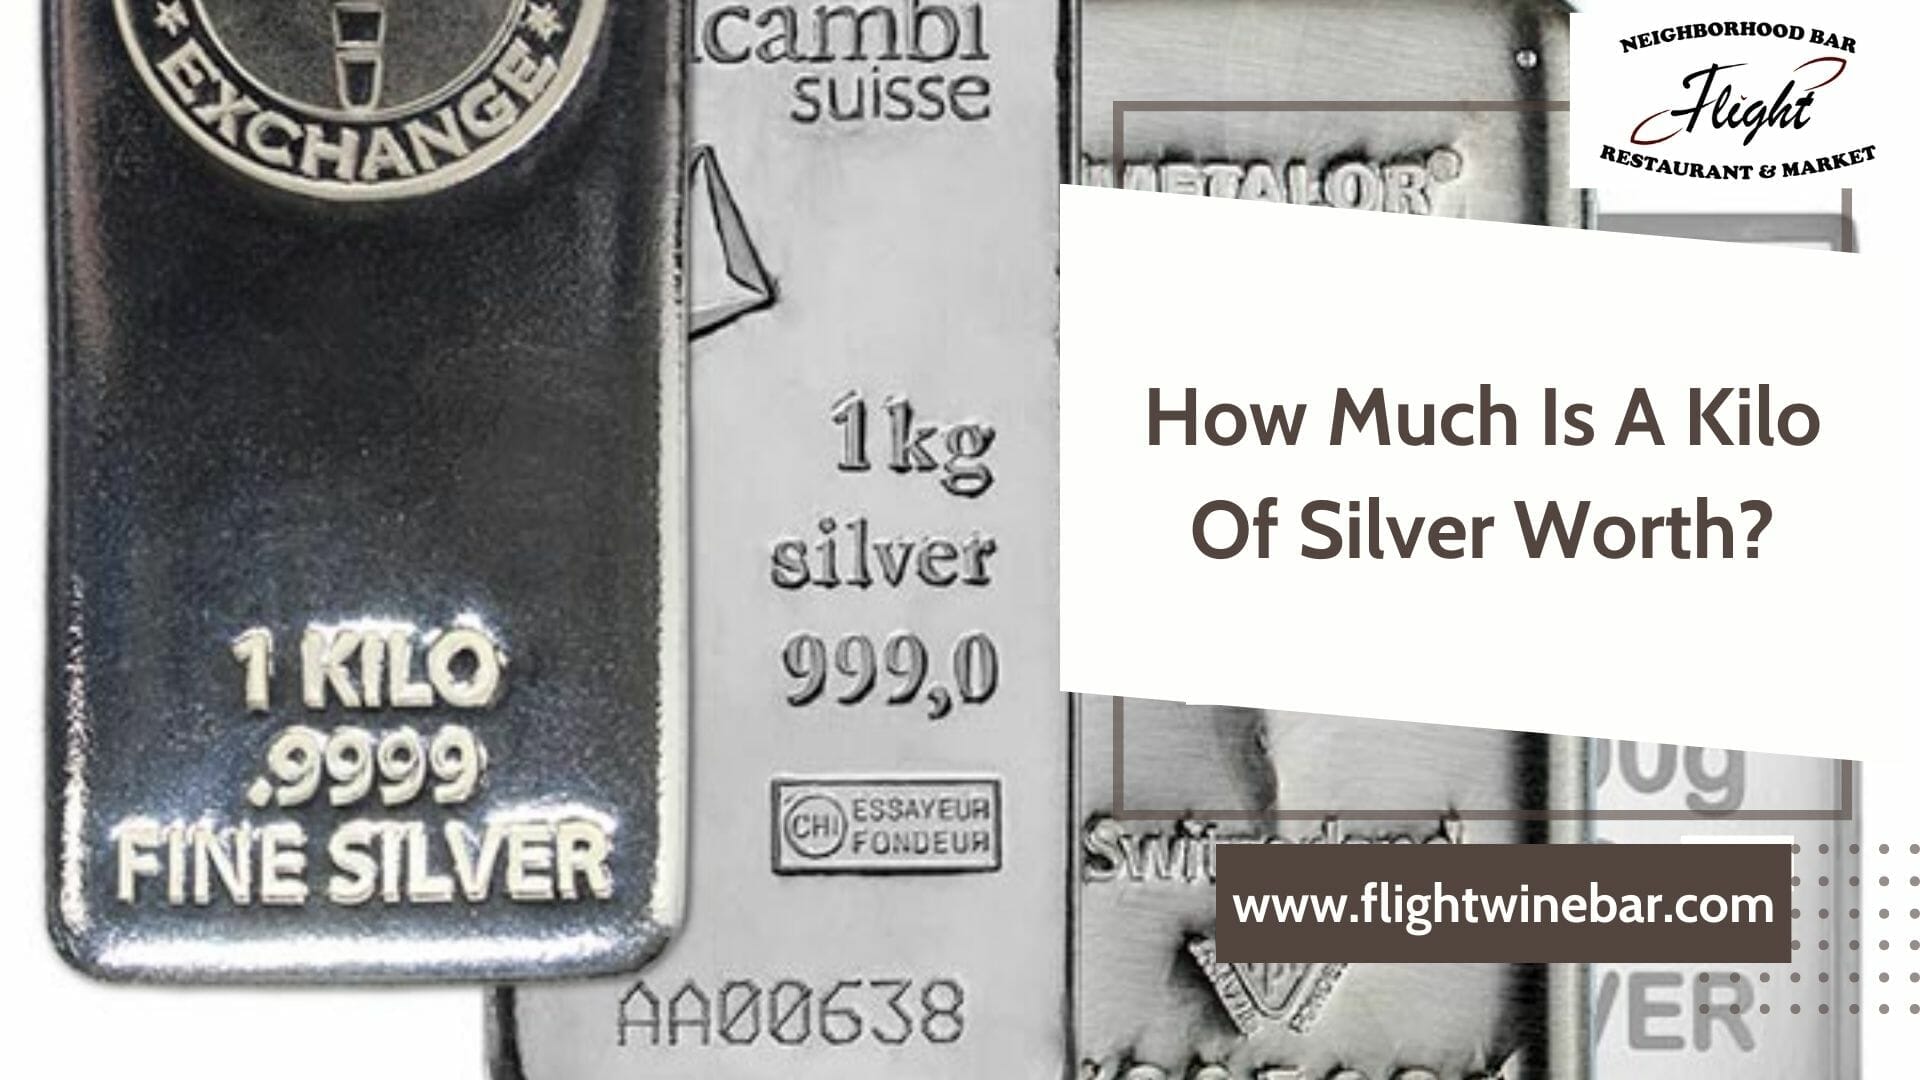 How Much Is A Kilo Of Silver Worth